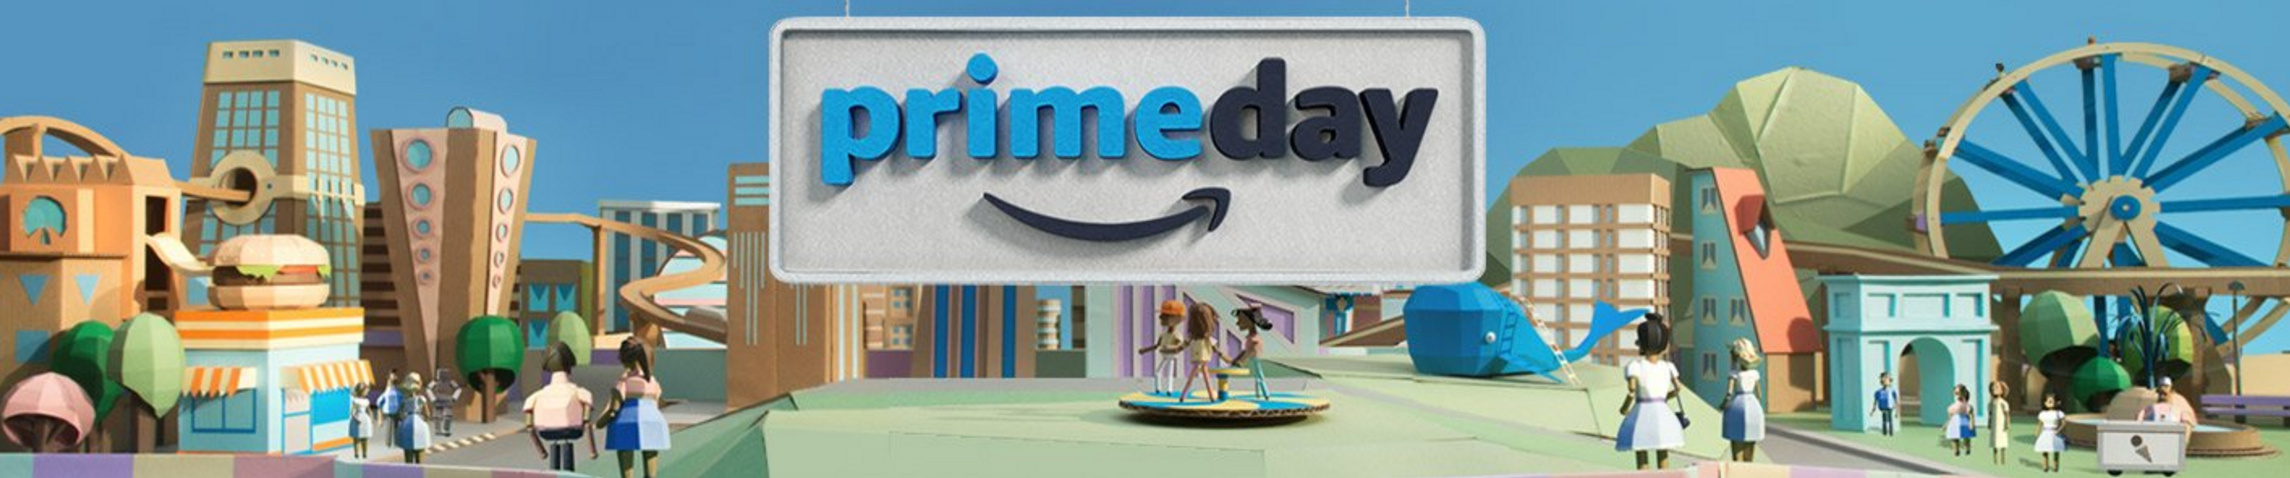 Amazon:  This Year’s Prime Day Was “The Biggest Day Ever” For The Company